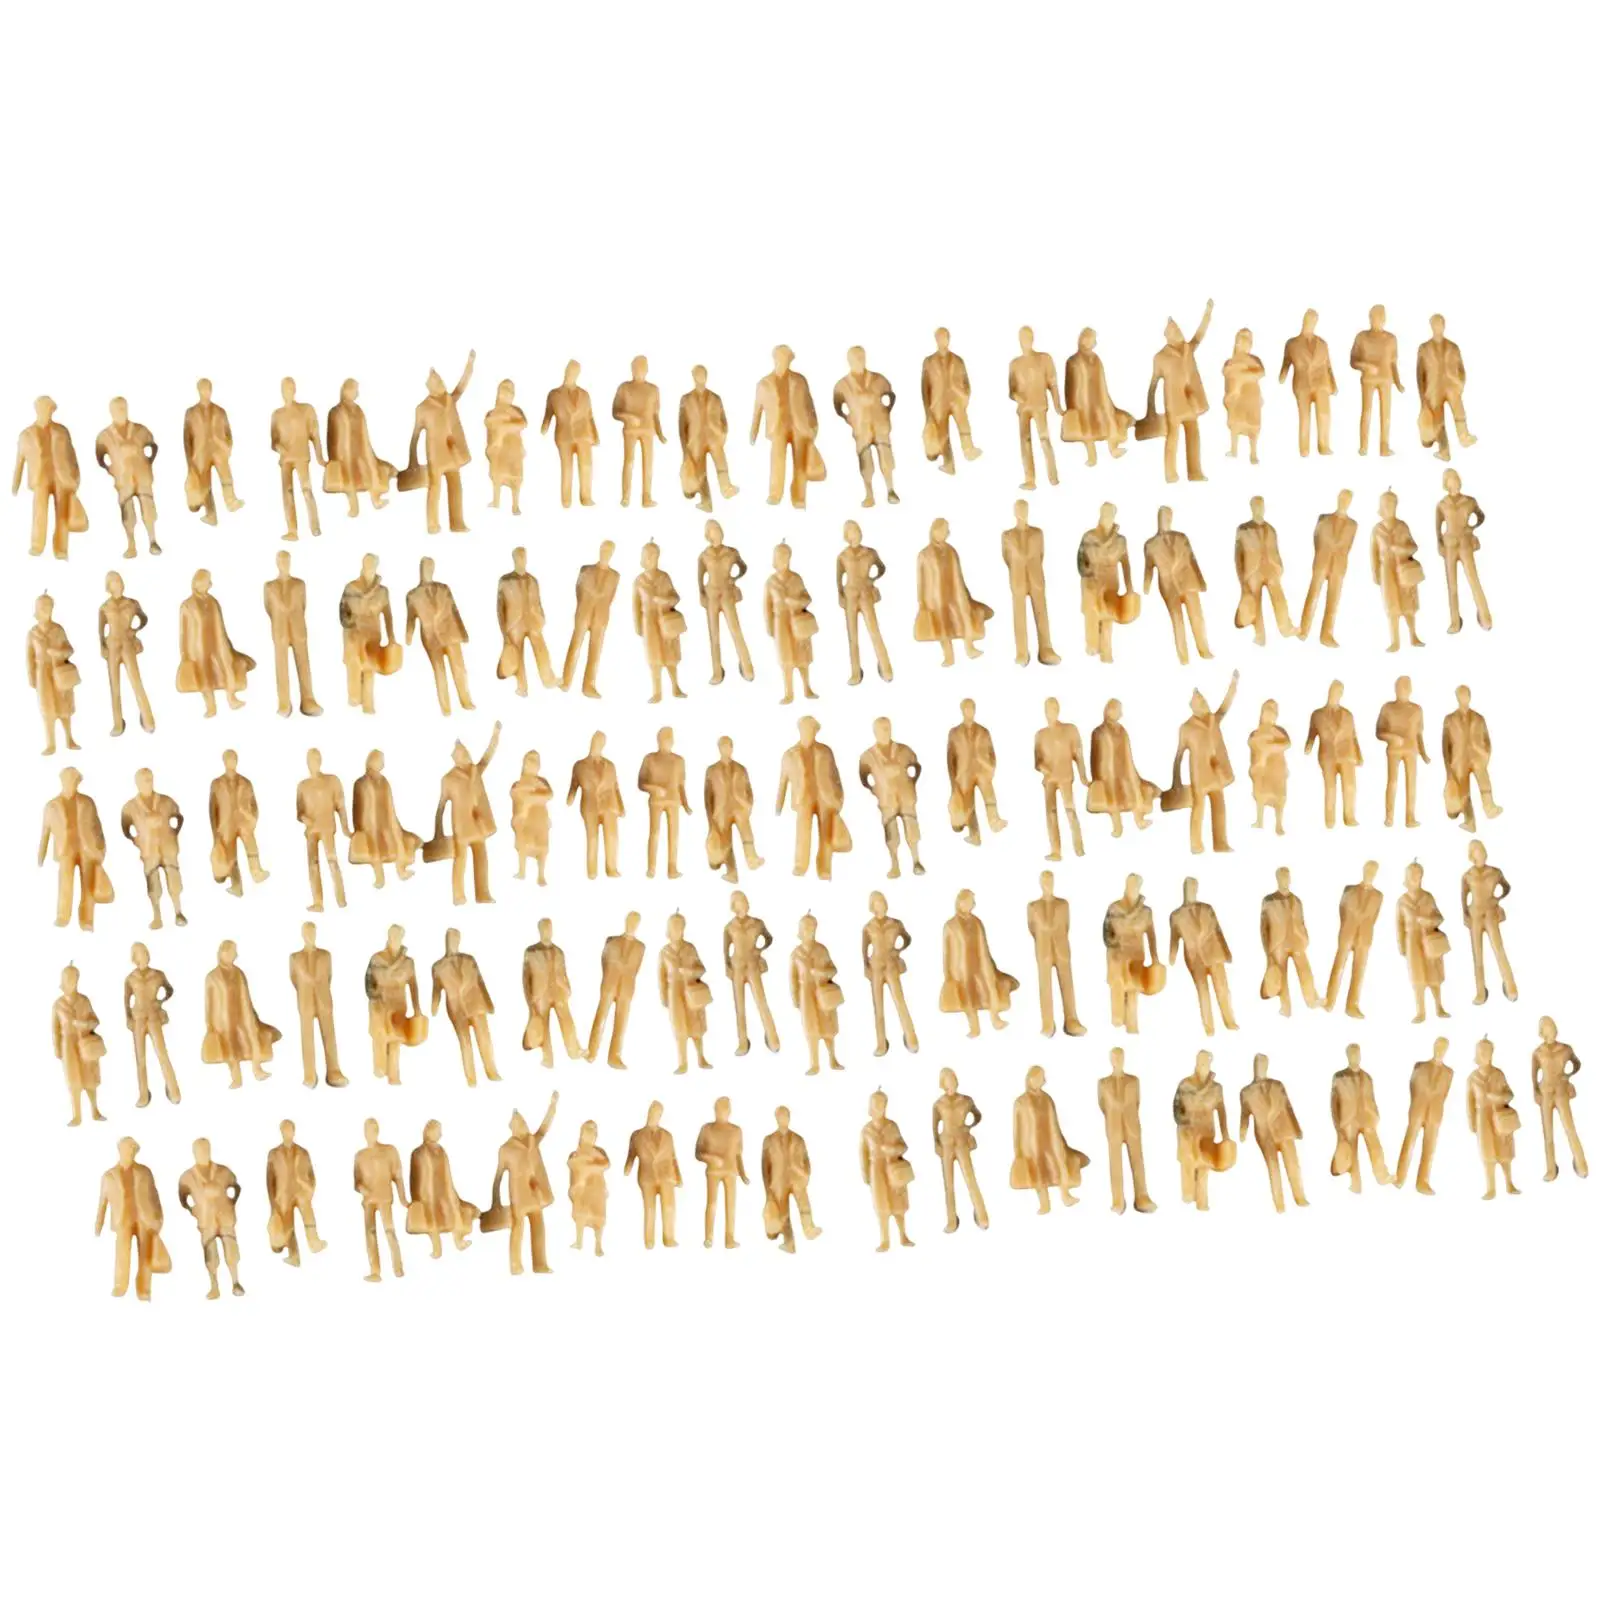 100 Pieces Simulated 1:87 Scale Model Figures Doll Miniature Scenes DIY Micro Landscapes Unpainted Tiny People Standing Ornament